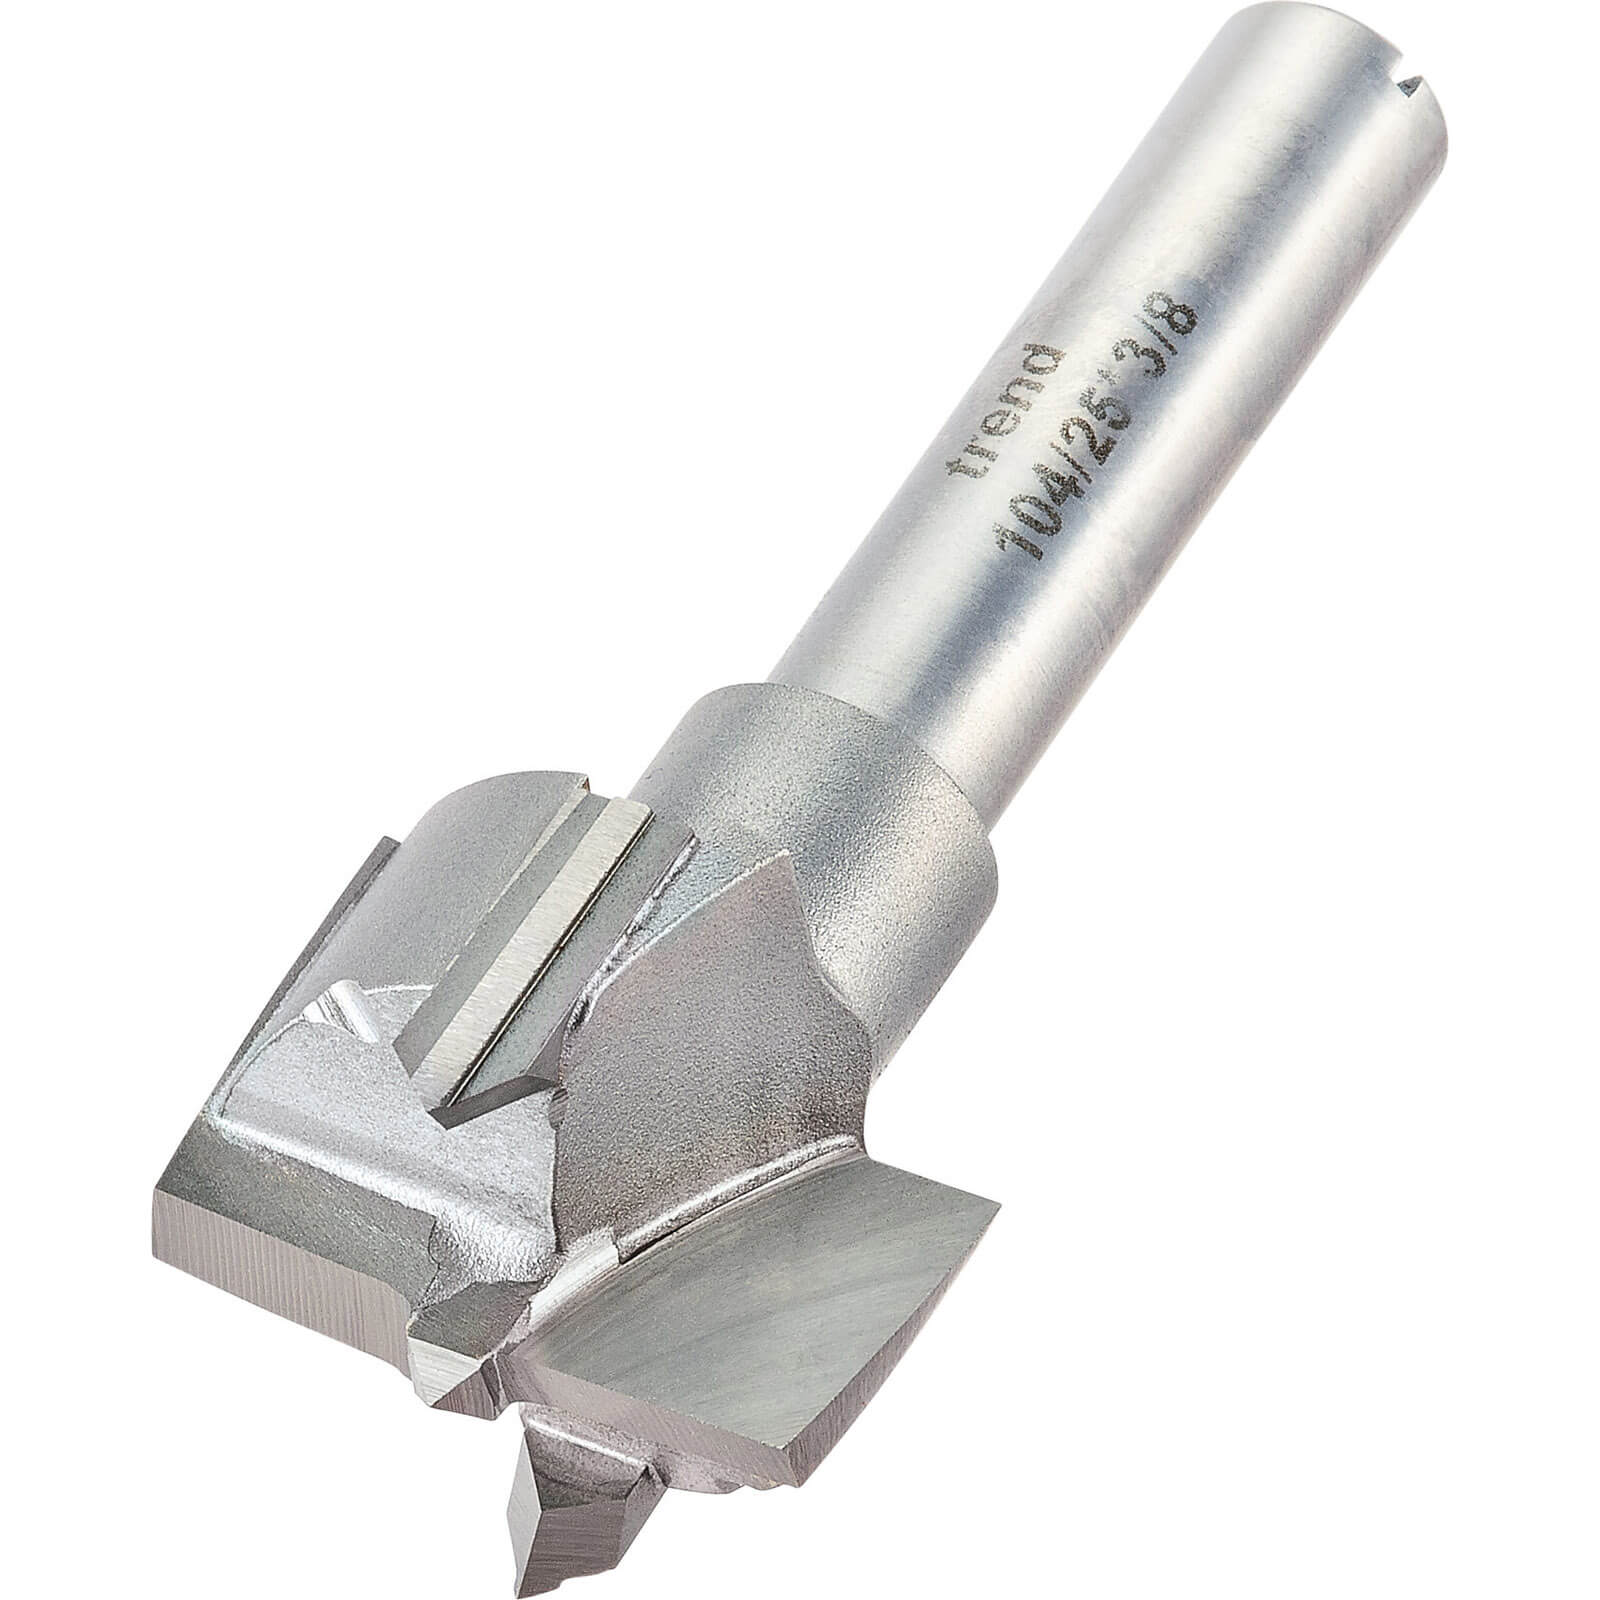 Photo of Trend Tct Hinge Sinking Router Bit 25mm 3/8